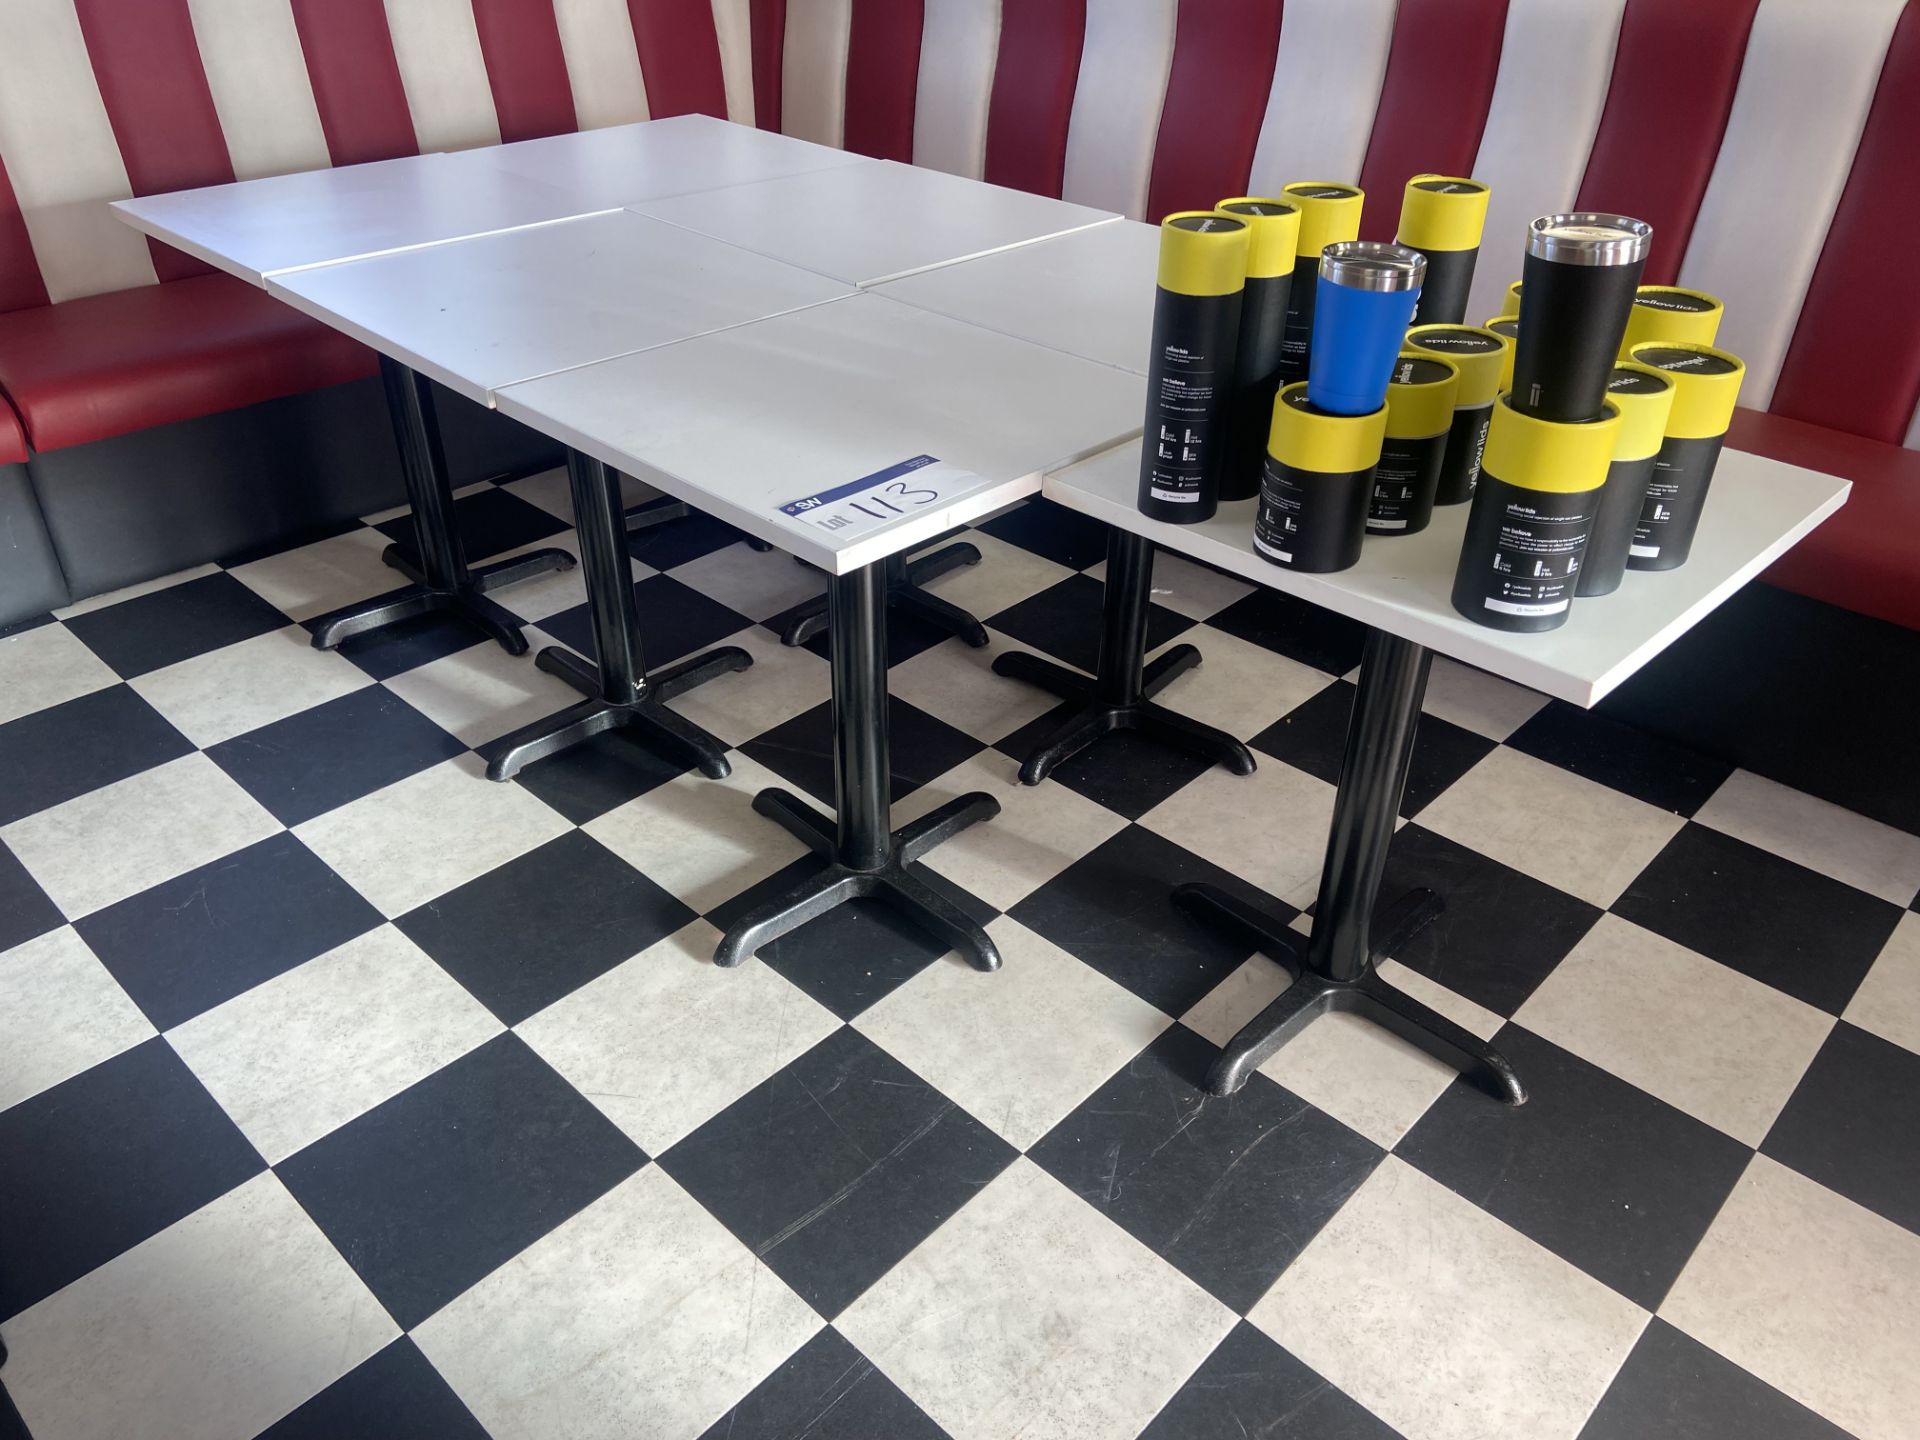 Five Steel Framed Tables, each 600mm x 600mm (excluding stock contents) Please read the following